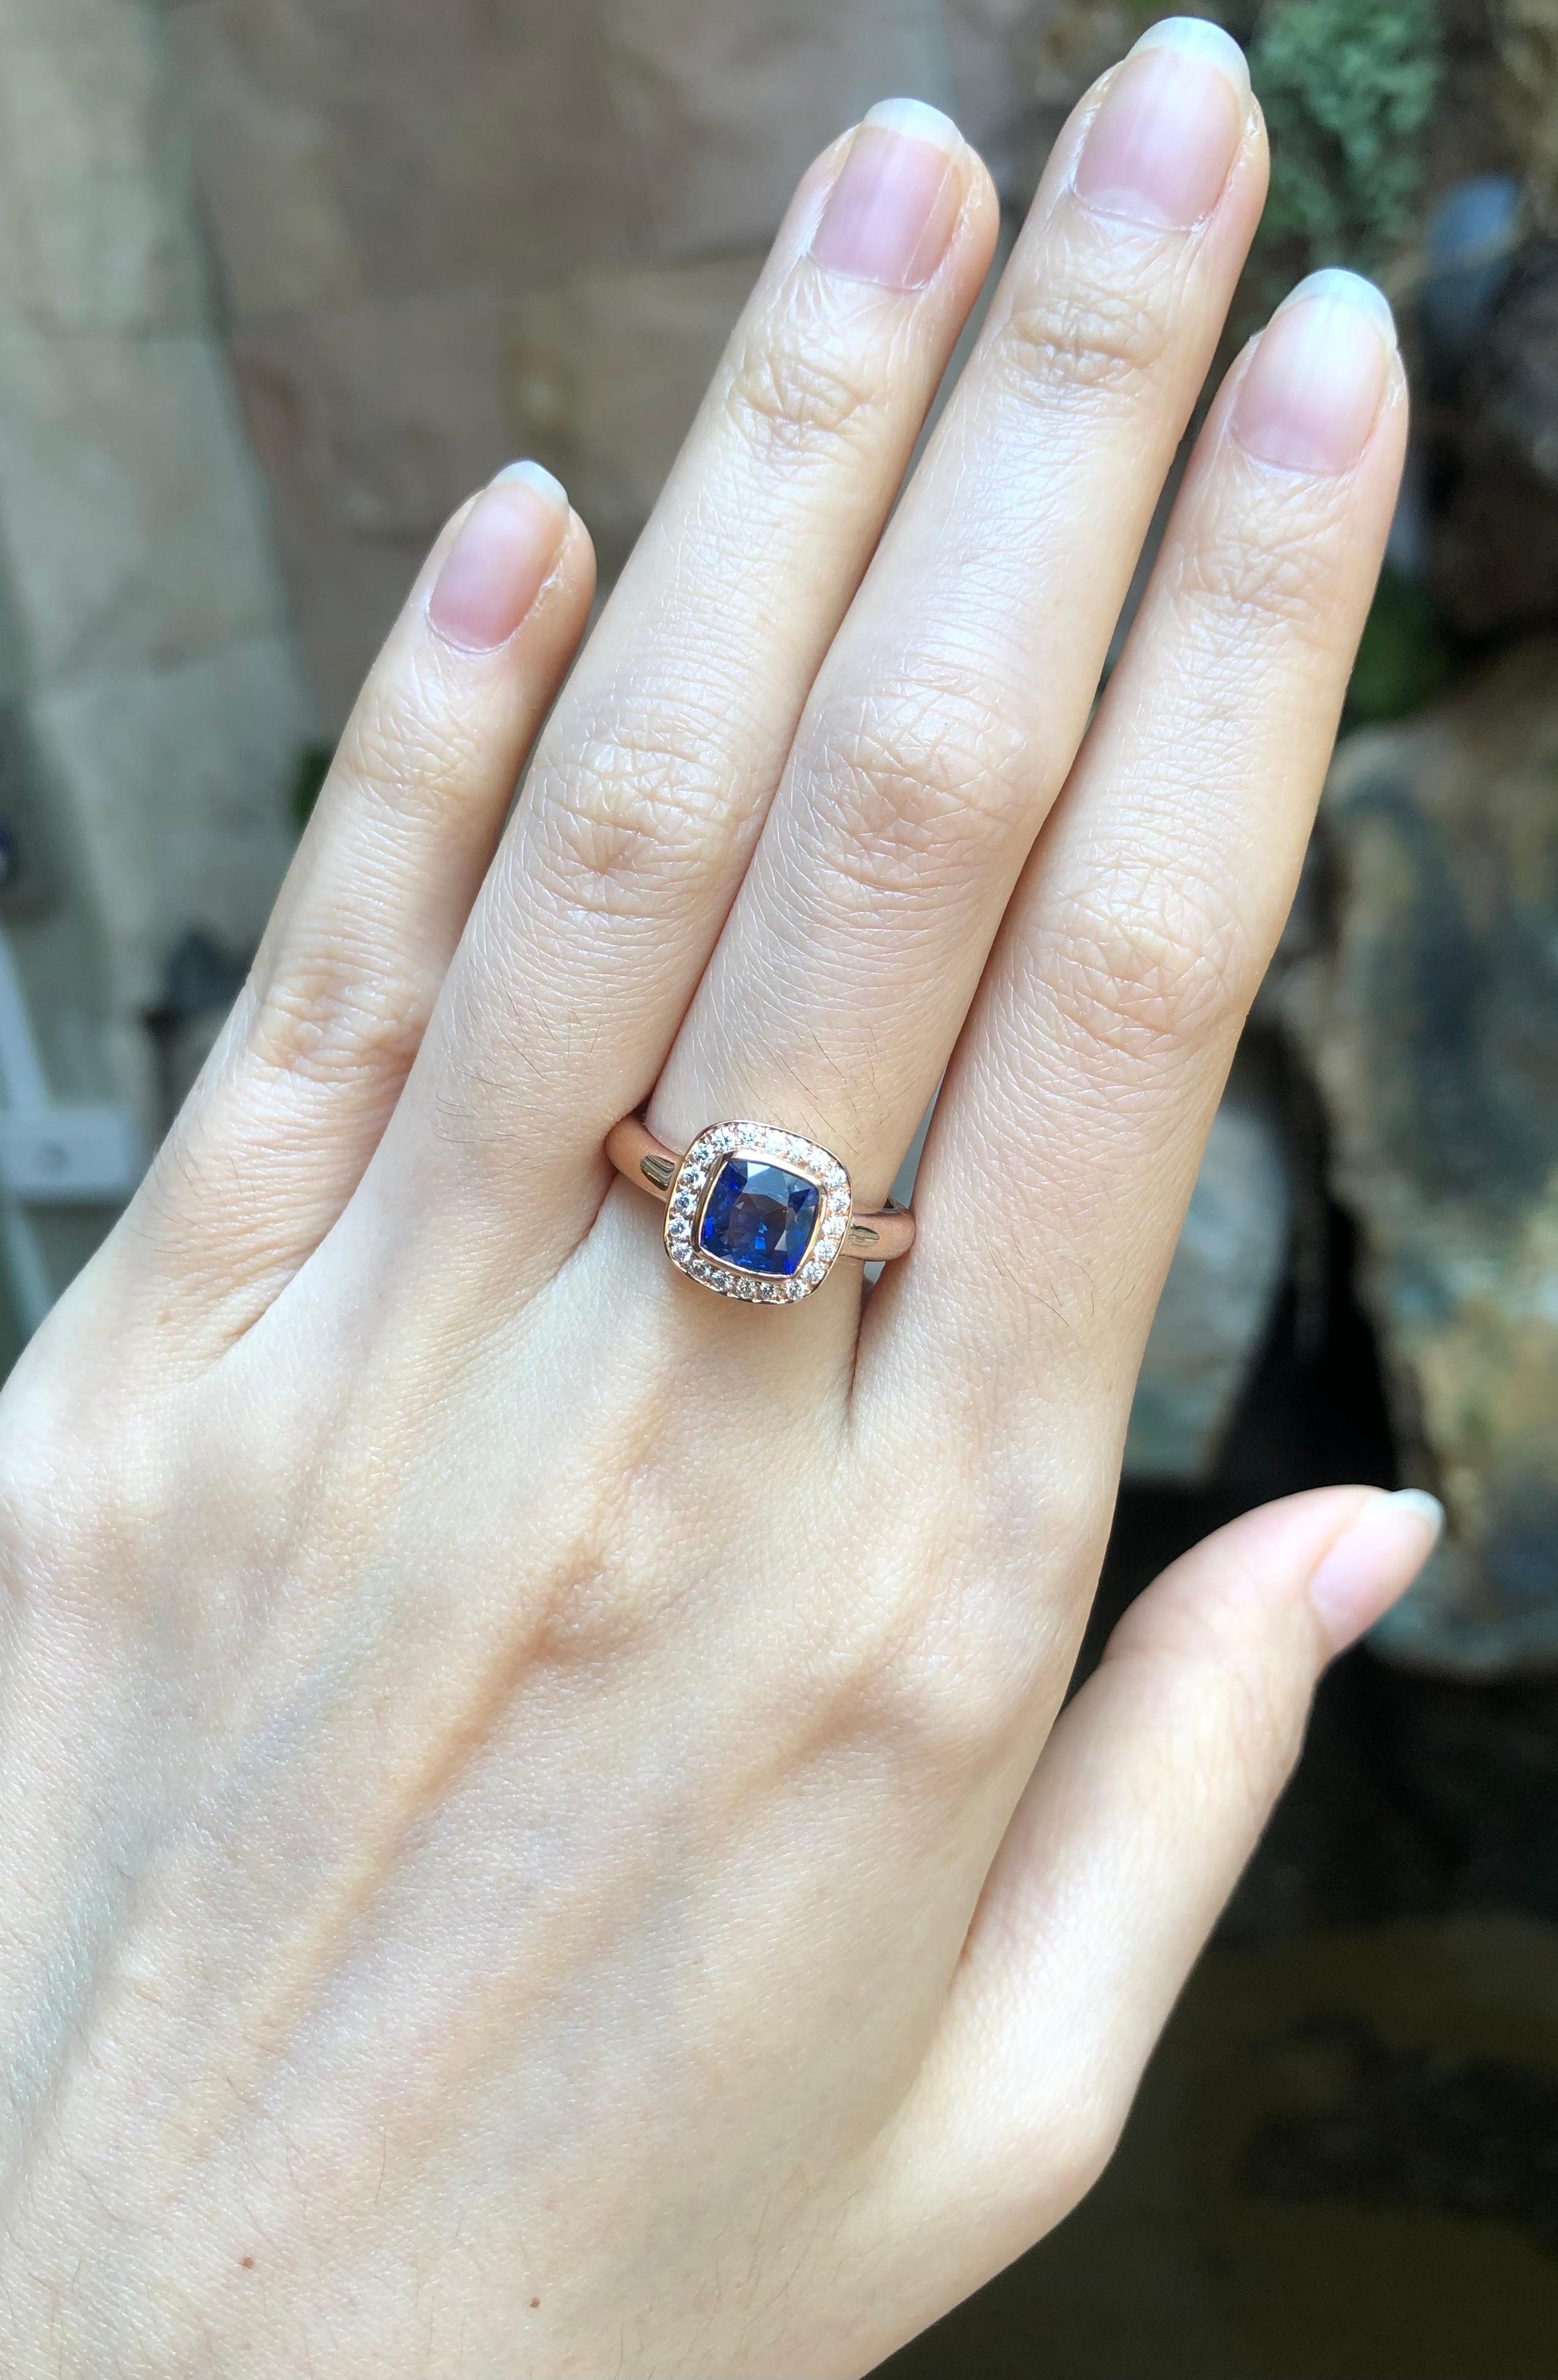 Blue Sapphire 1.70 carats with Diamond 0.17 carat Ring set in 18 Karat Rose Gold Settings

Width:  1.1 cm 
Length: 1.0 cm
Ring Size: 52
Total Weight: 5.18 grams

